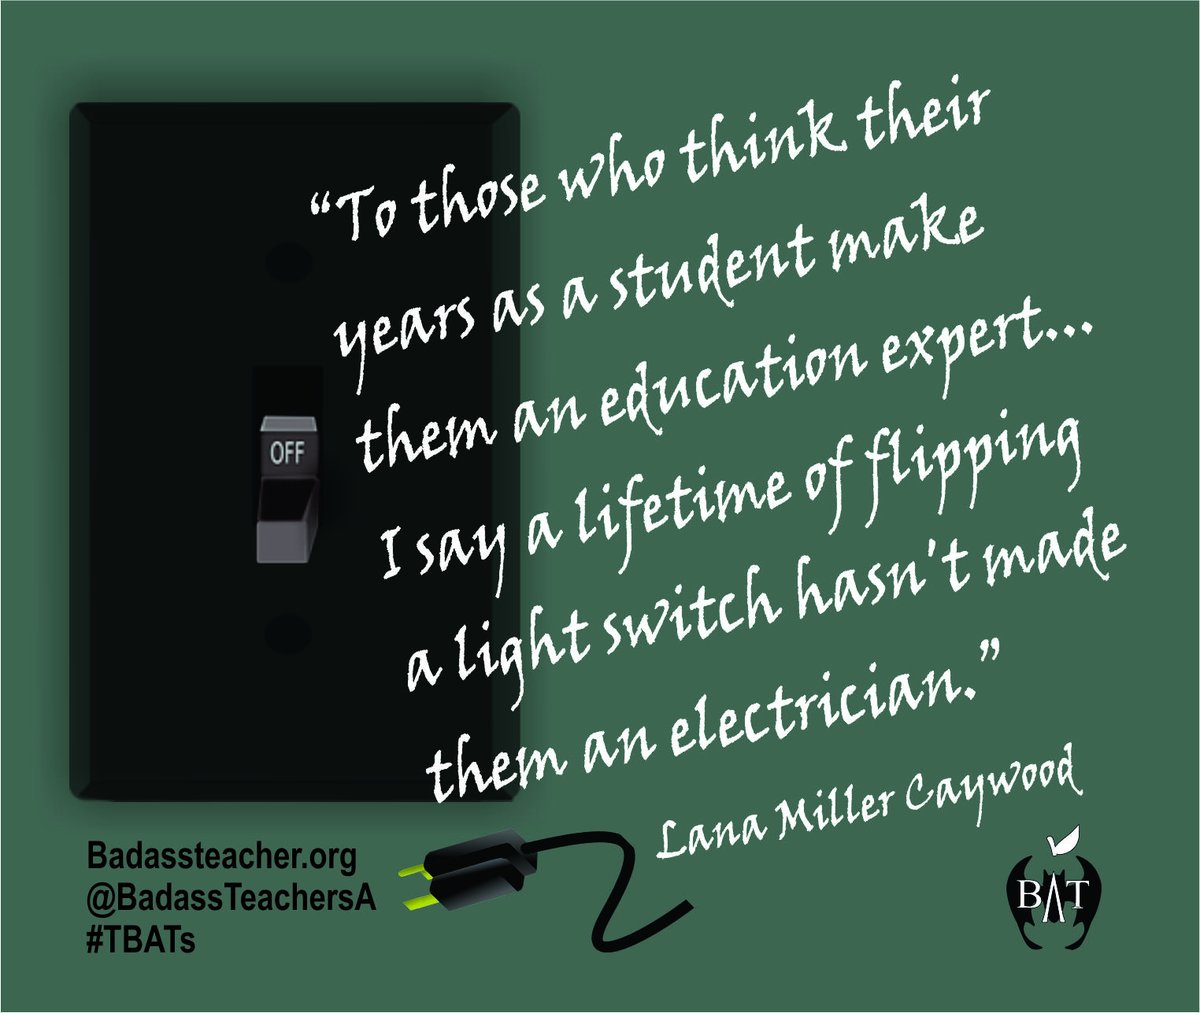 More goes into teaching than people think. You can't pick it up from a couple of YouTube videos.
#RespectTeachers #SupportPublicSchools #TBATs